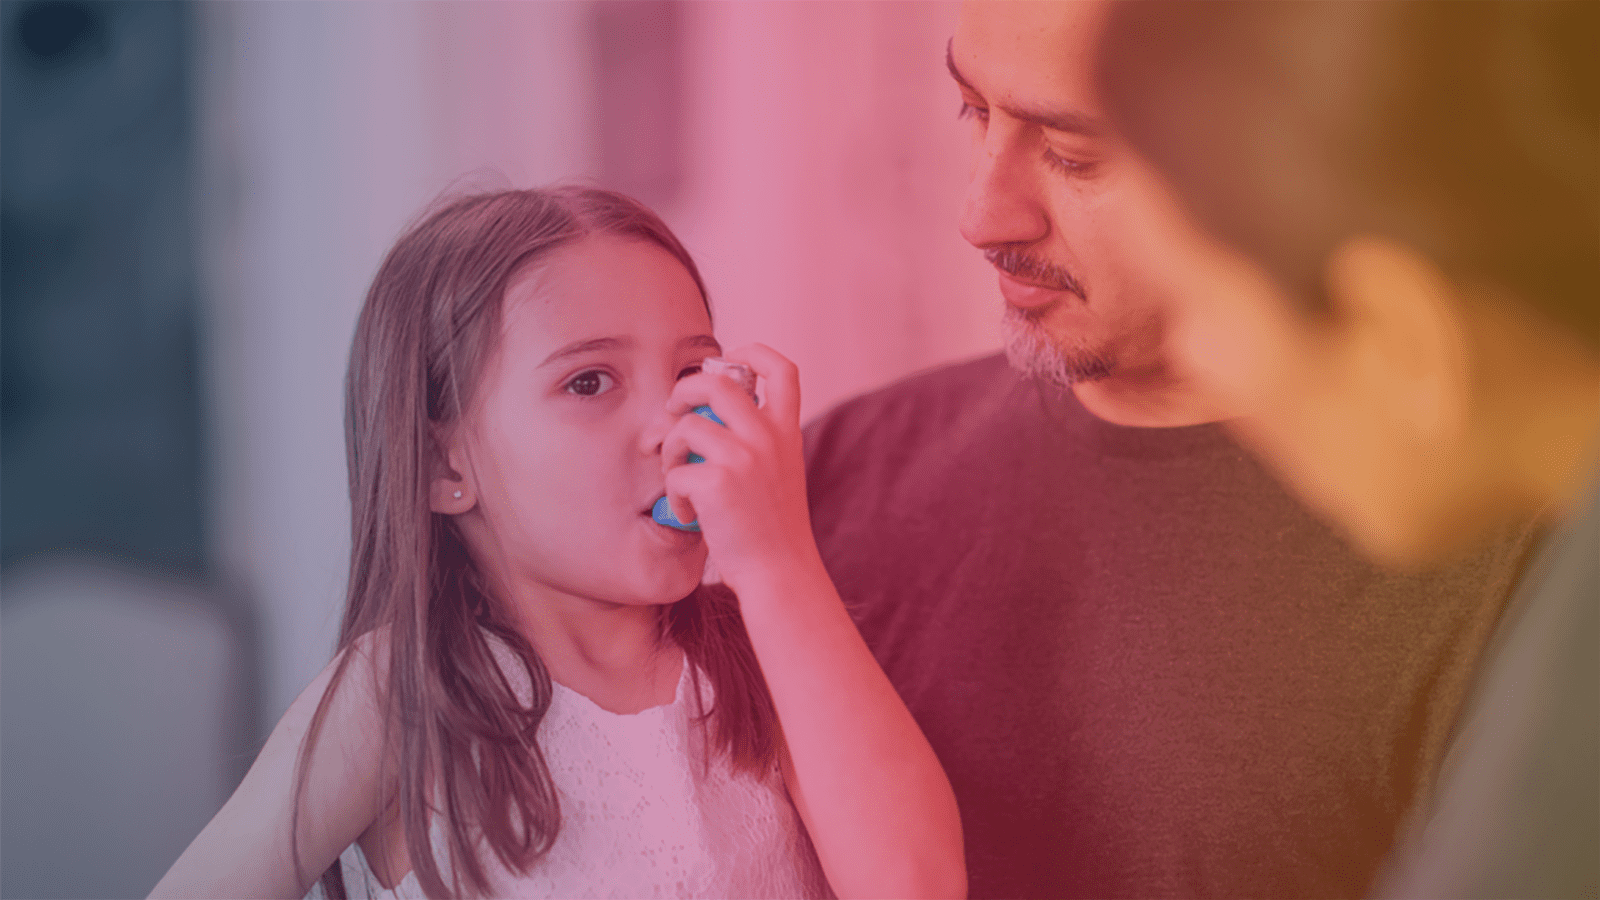 In a first-of-its-kind study, researchers from the USC have found a link between EV adoption and reduced asthma hospitalizations.